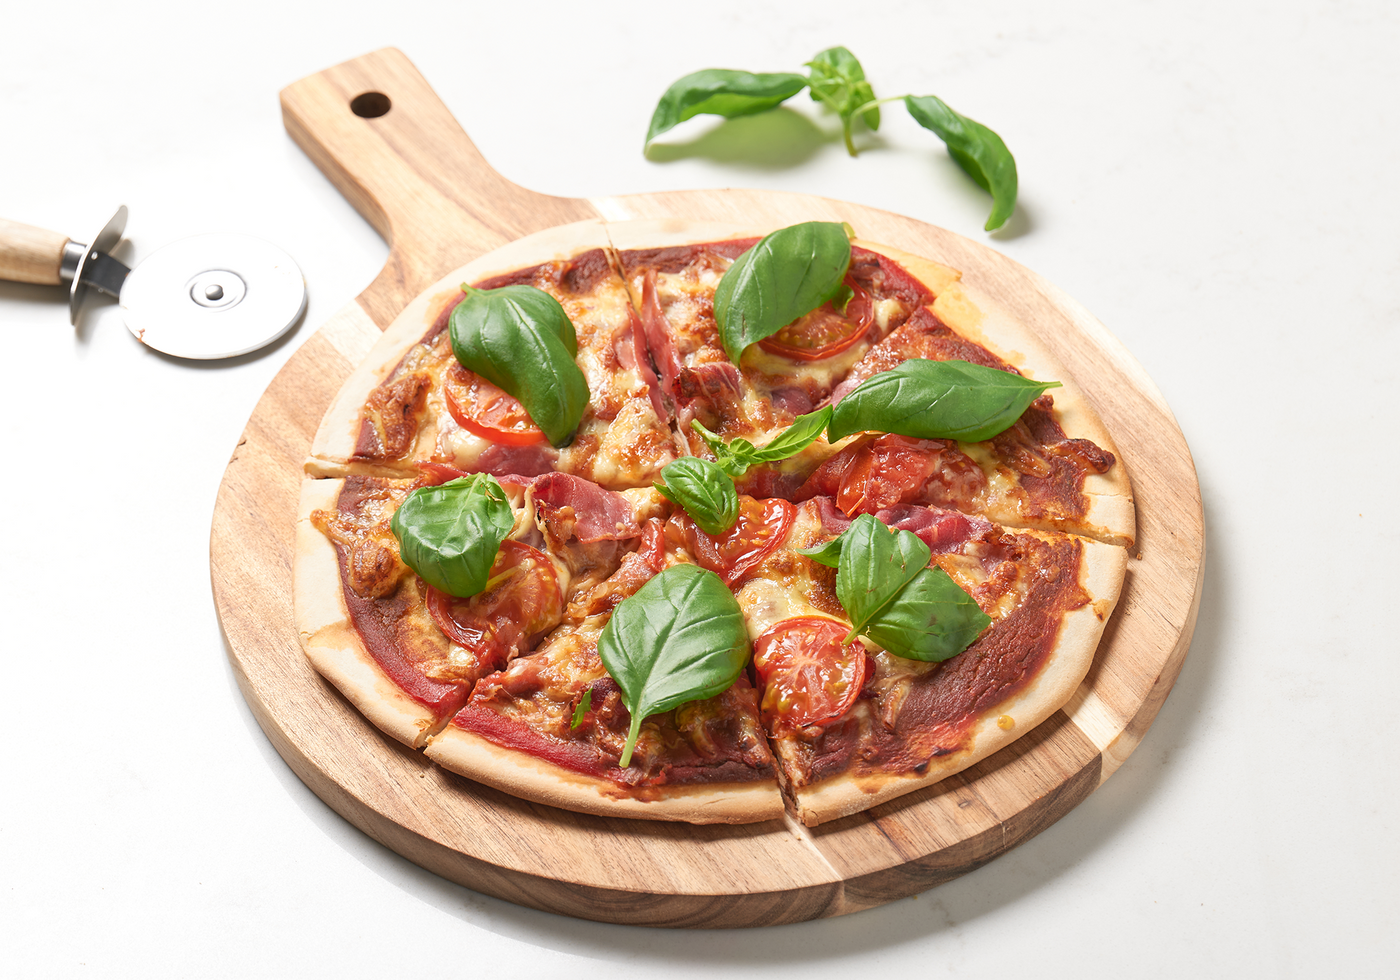 Proscuitto and basil pizza